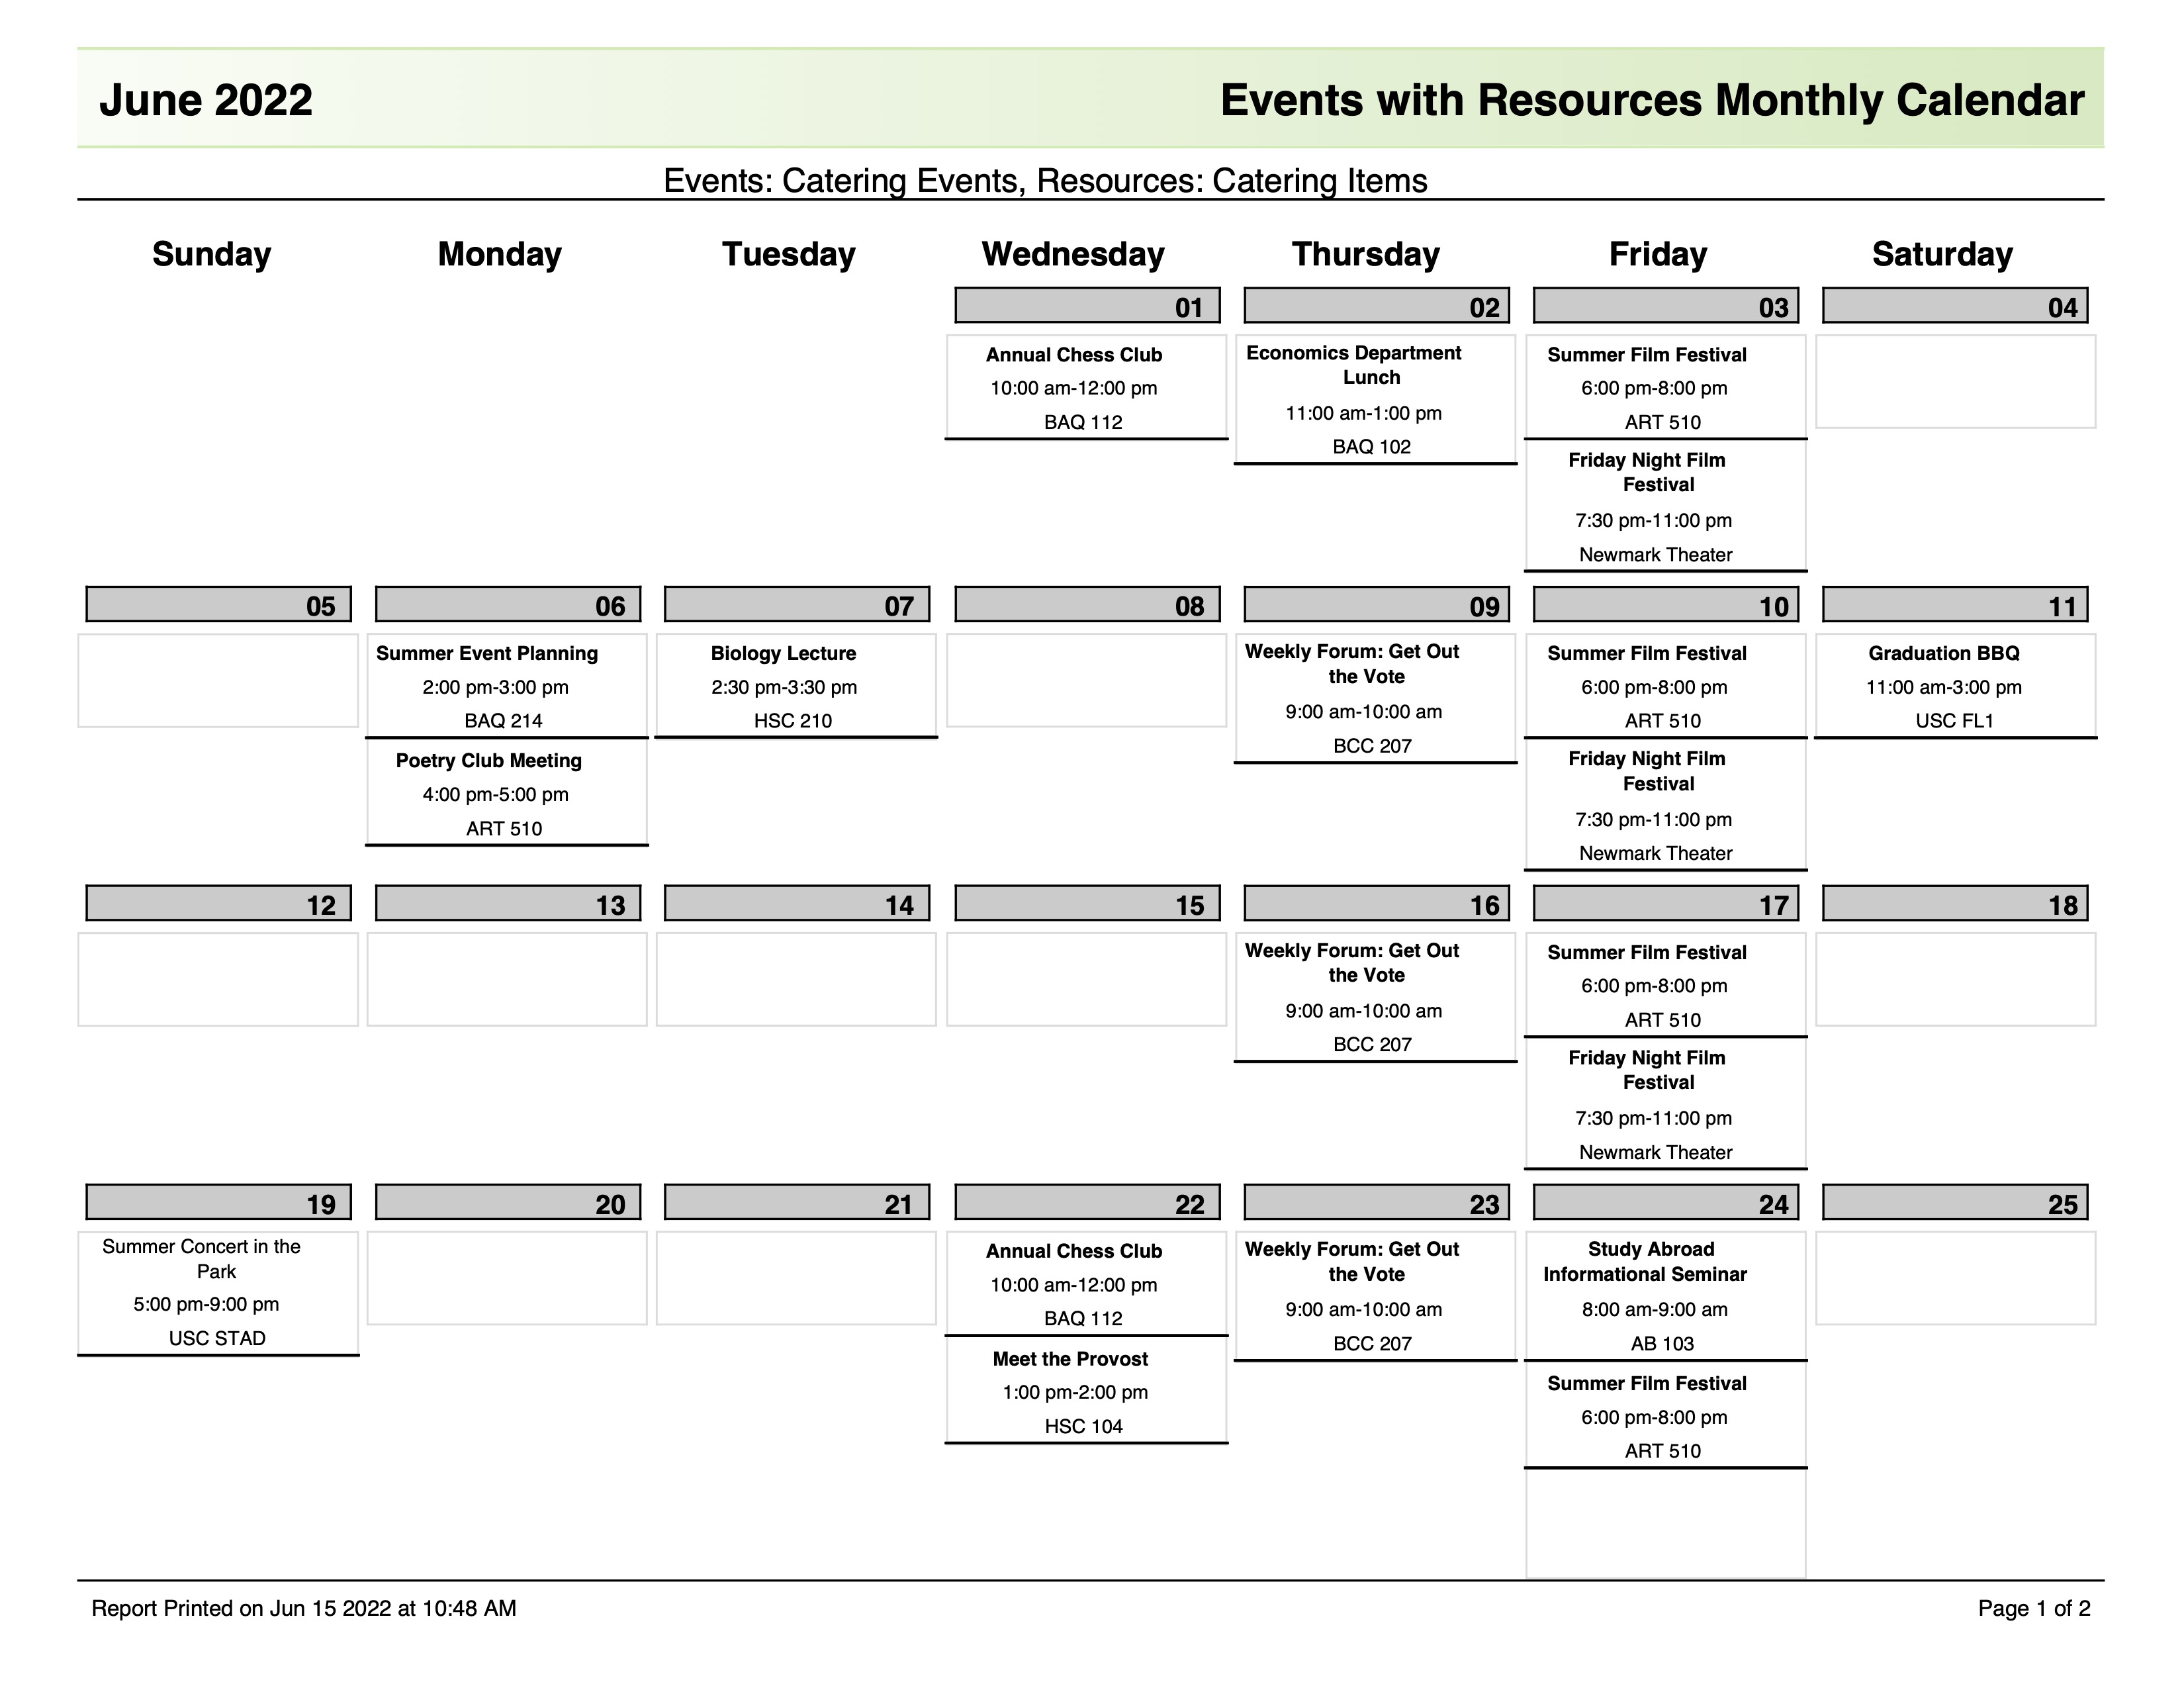 Events with resources monthly calendar example